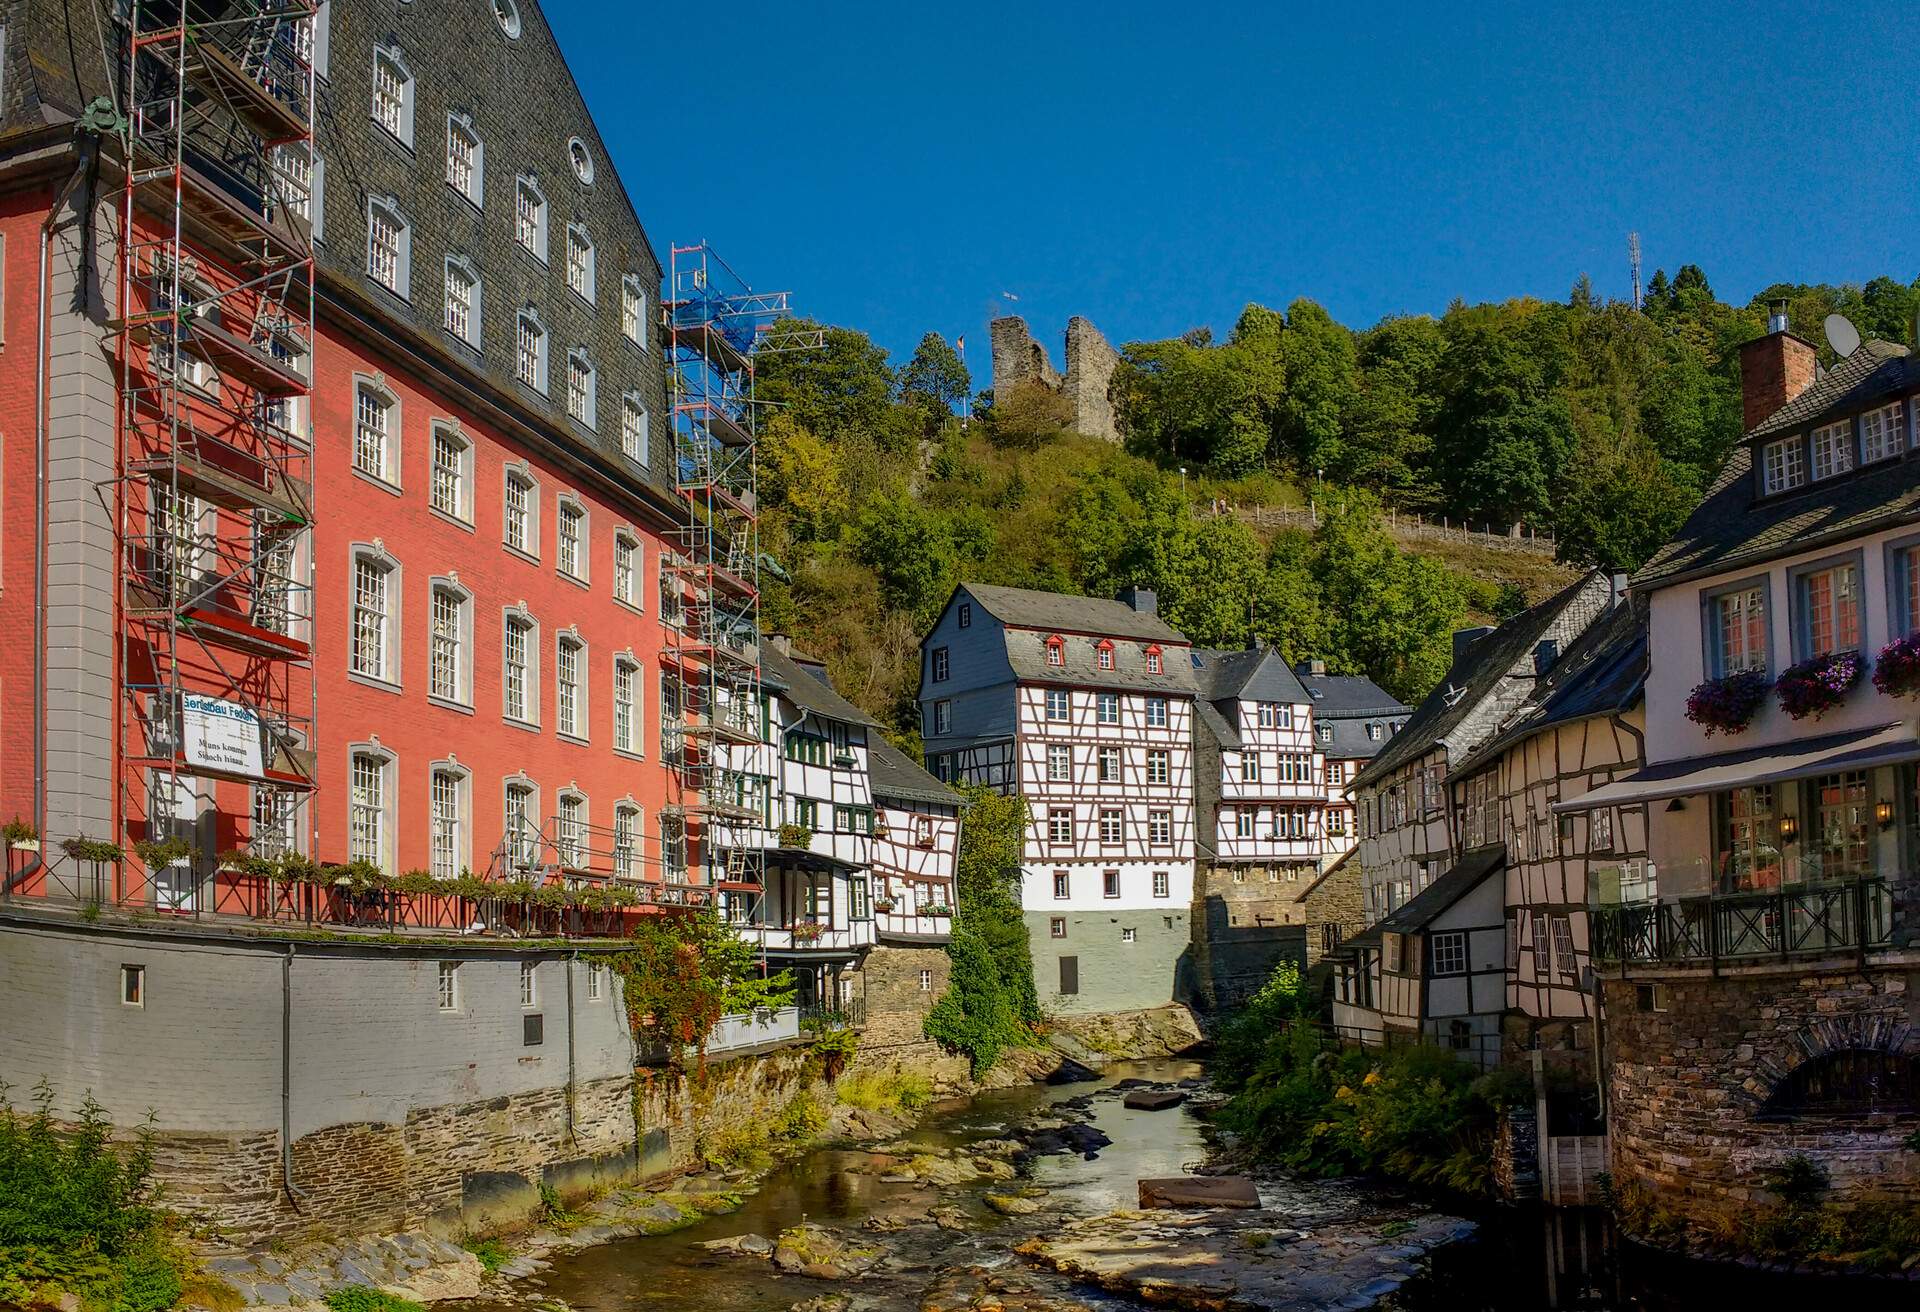 DEST_GERMANY_MONSCHAU_CANAL BY BUILDINGS IN TOWN_GettyImages-1177384764